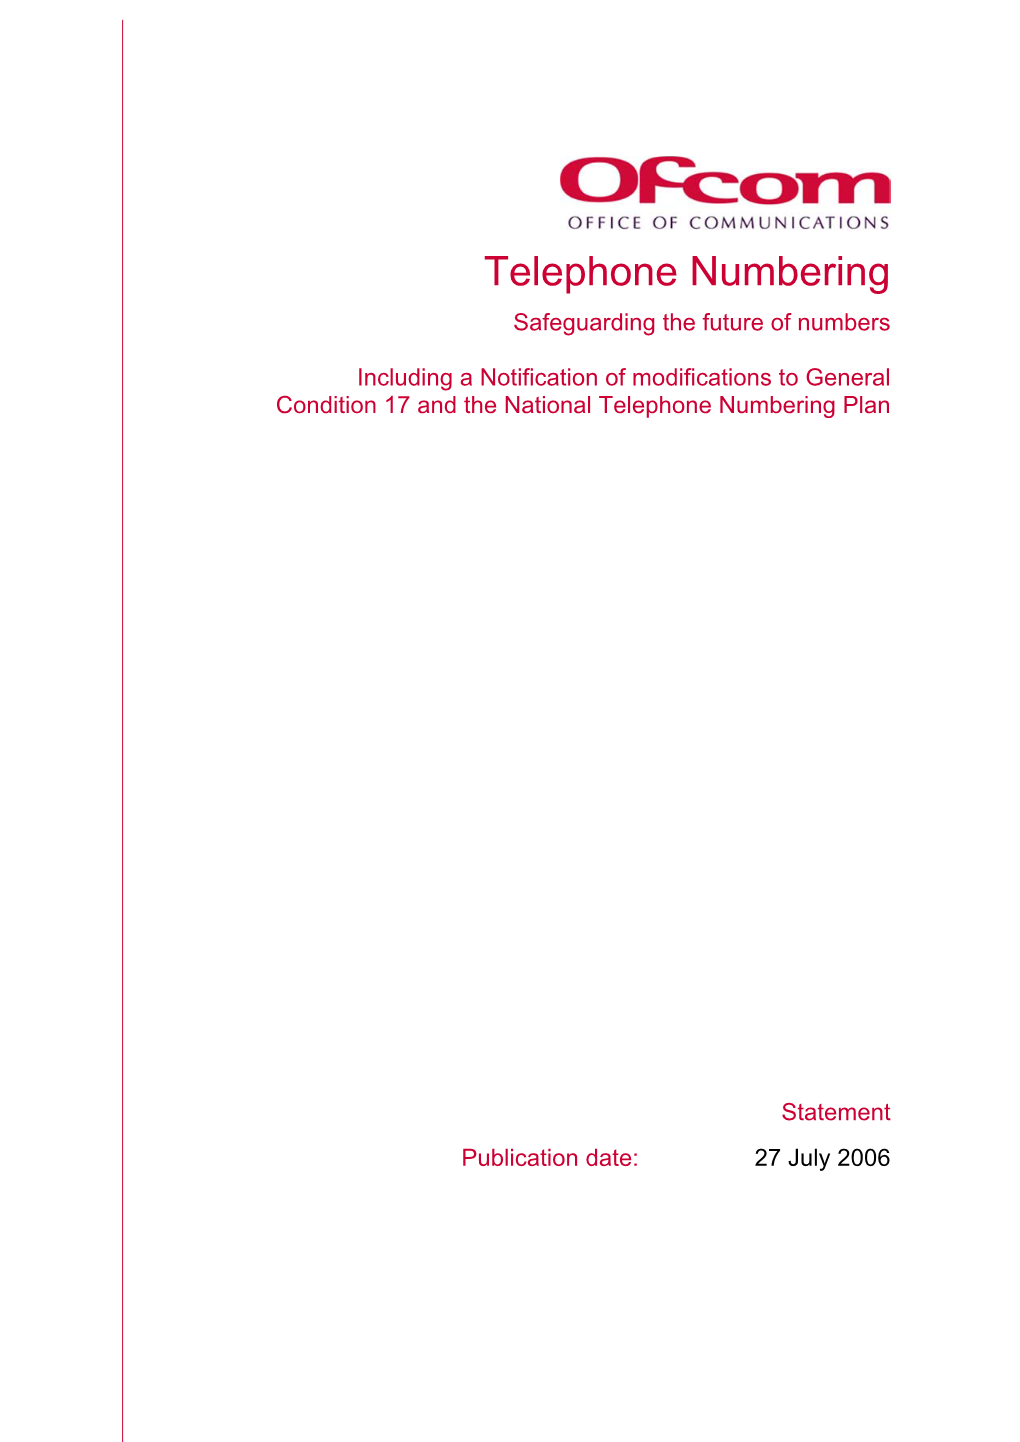 Safeguarding the Future of Telephone Numbers